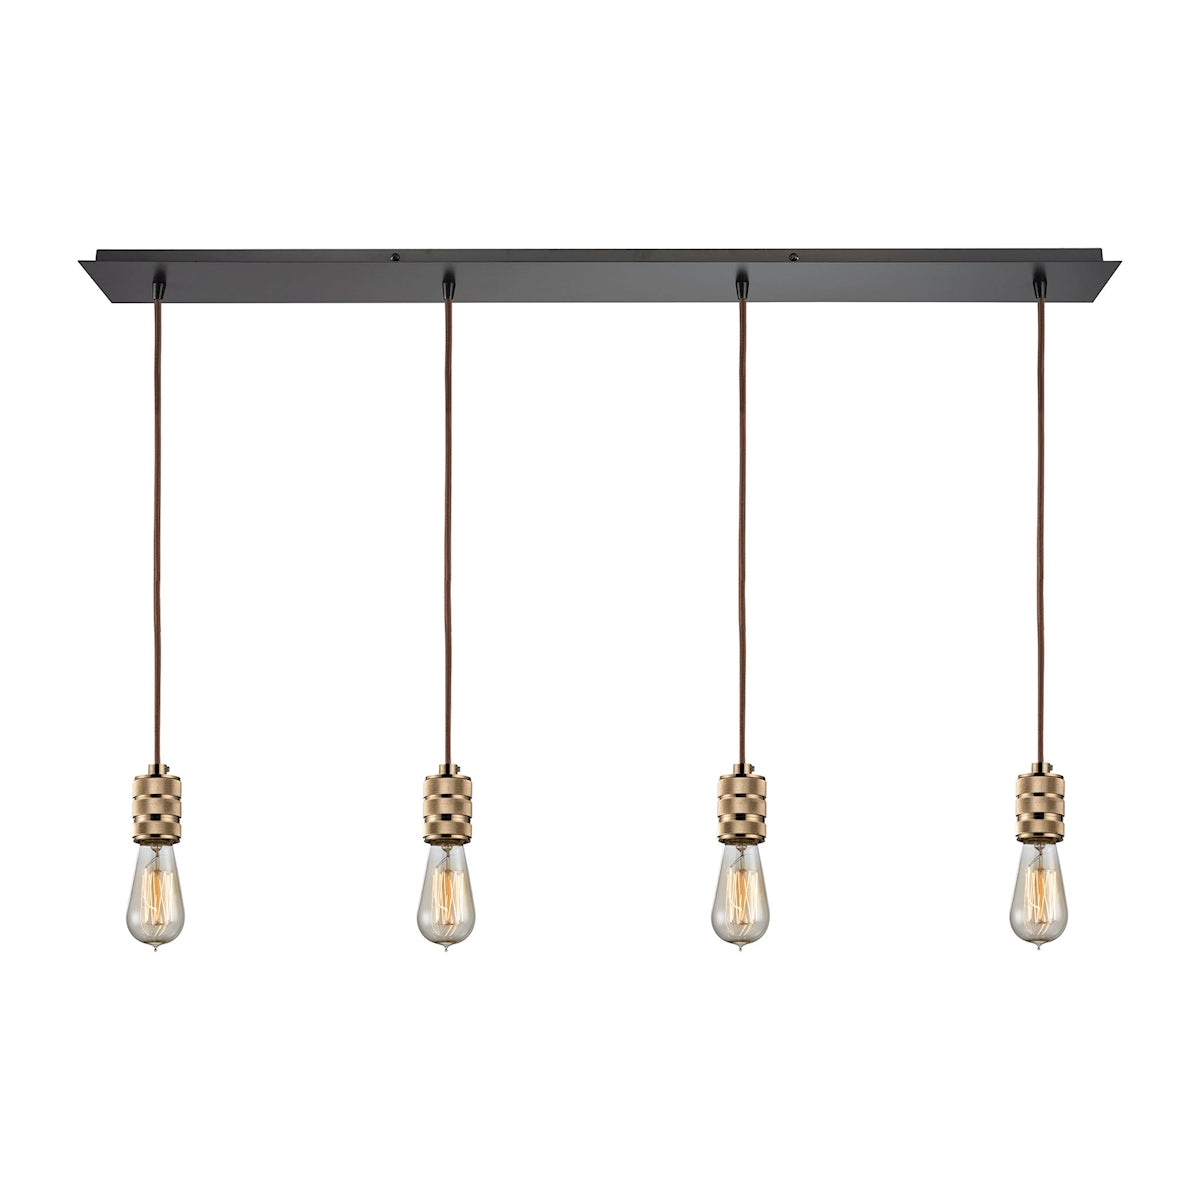 ELK Lighting 14391/4LP Camley 4-Light Linear Pendant Fixture in Oil Rubbed Bronze and Polished Gold